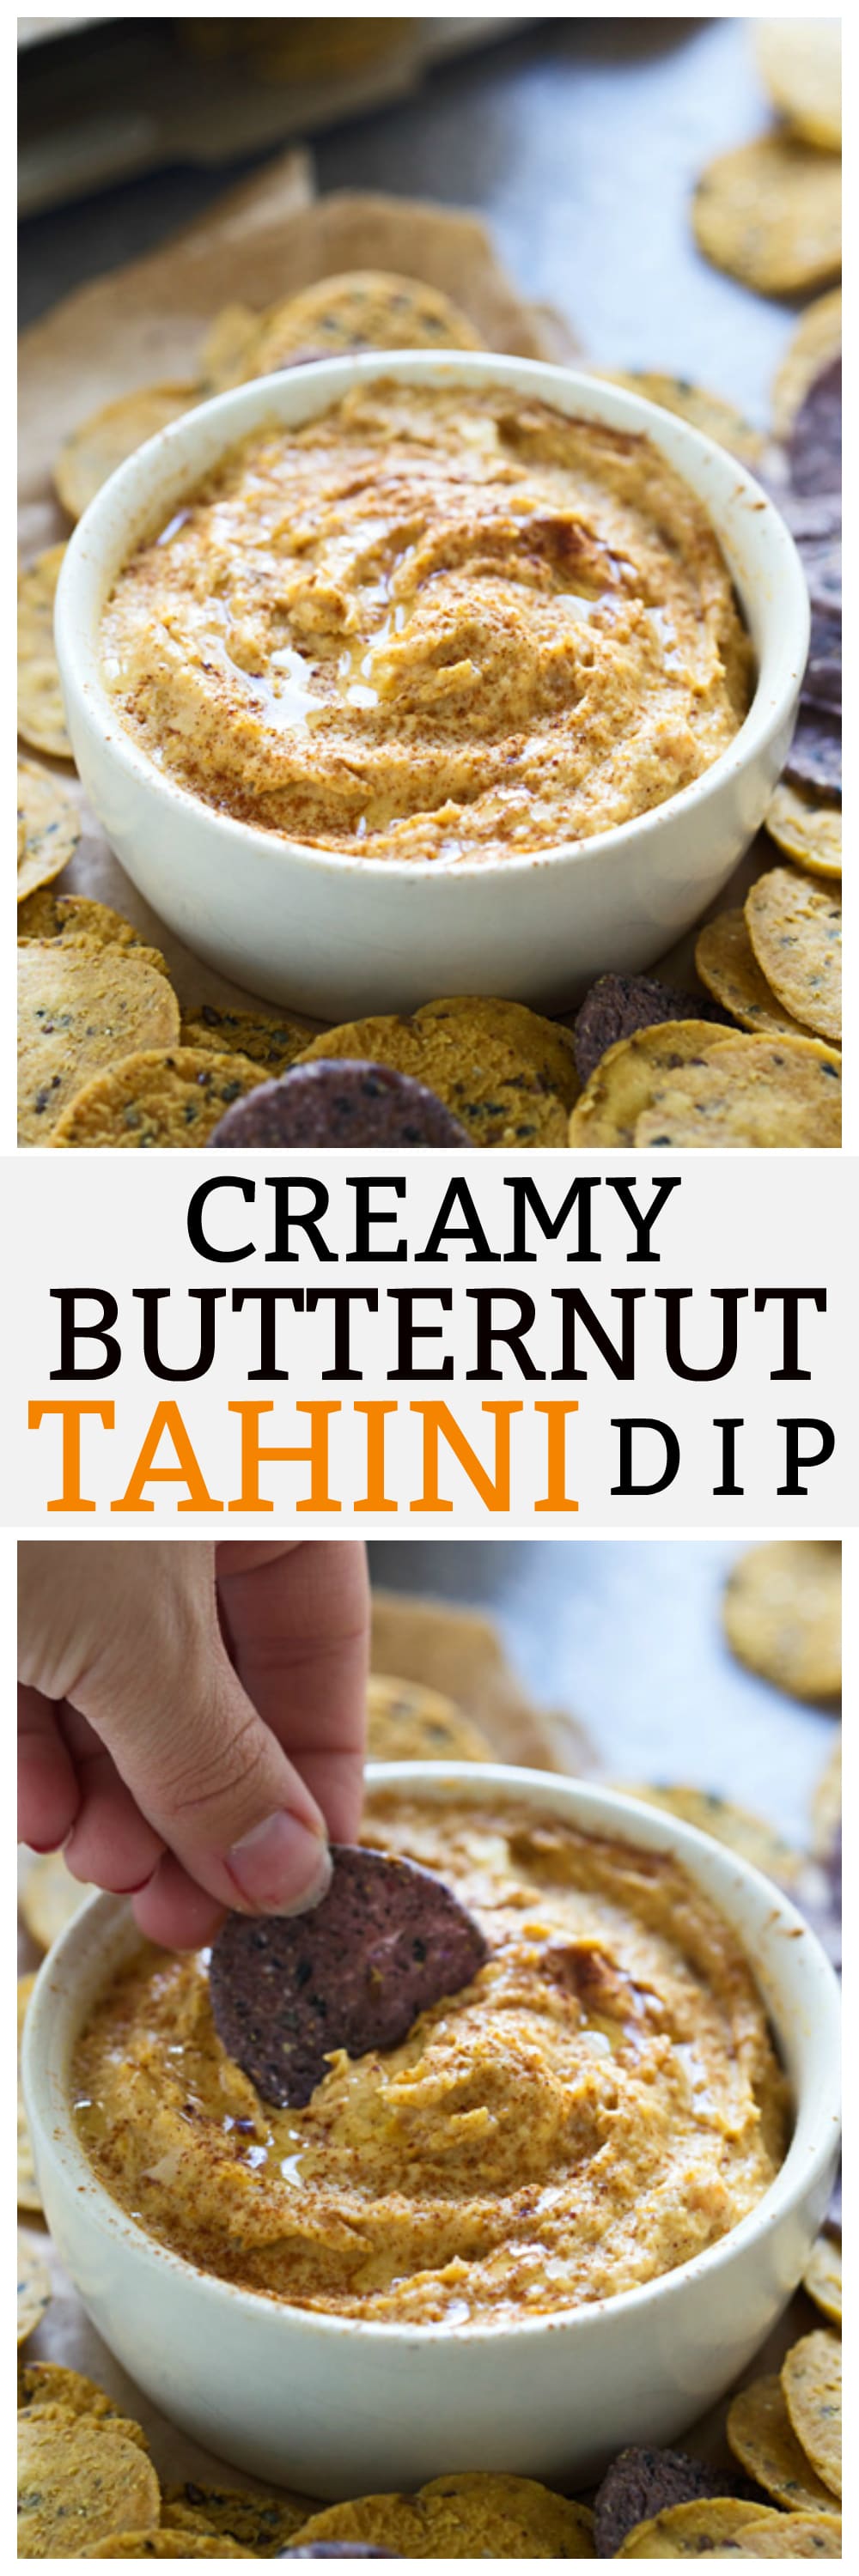 Butternut Squash Tahini Dip - Crazy easy and irresistibly creamy.